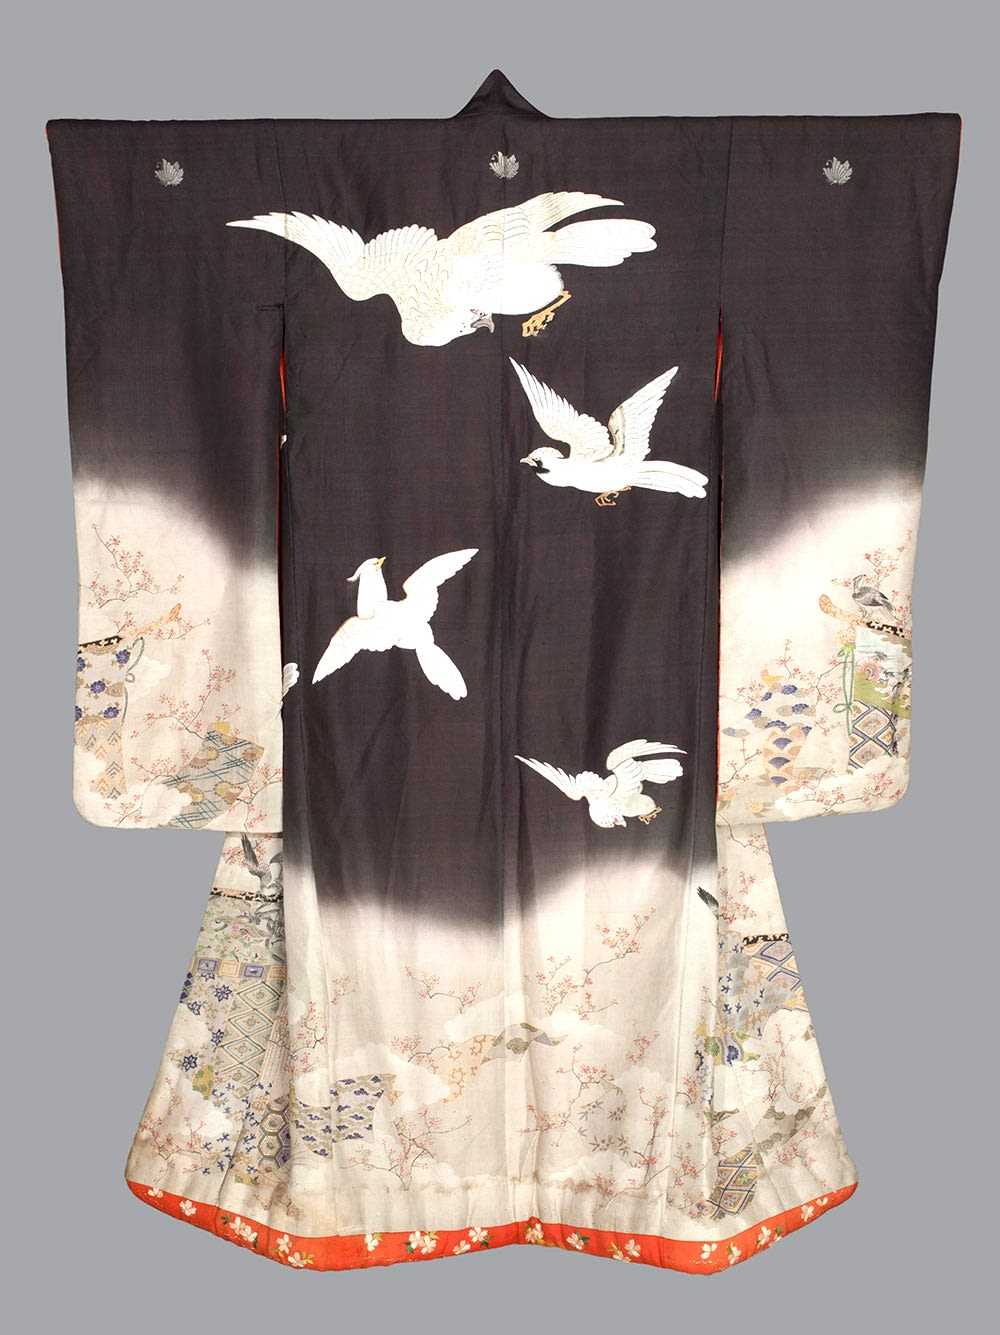 colour photograph of kimono which is mostly black and white with a motif of hawks